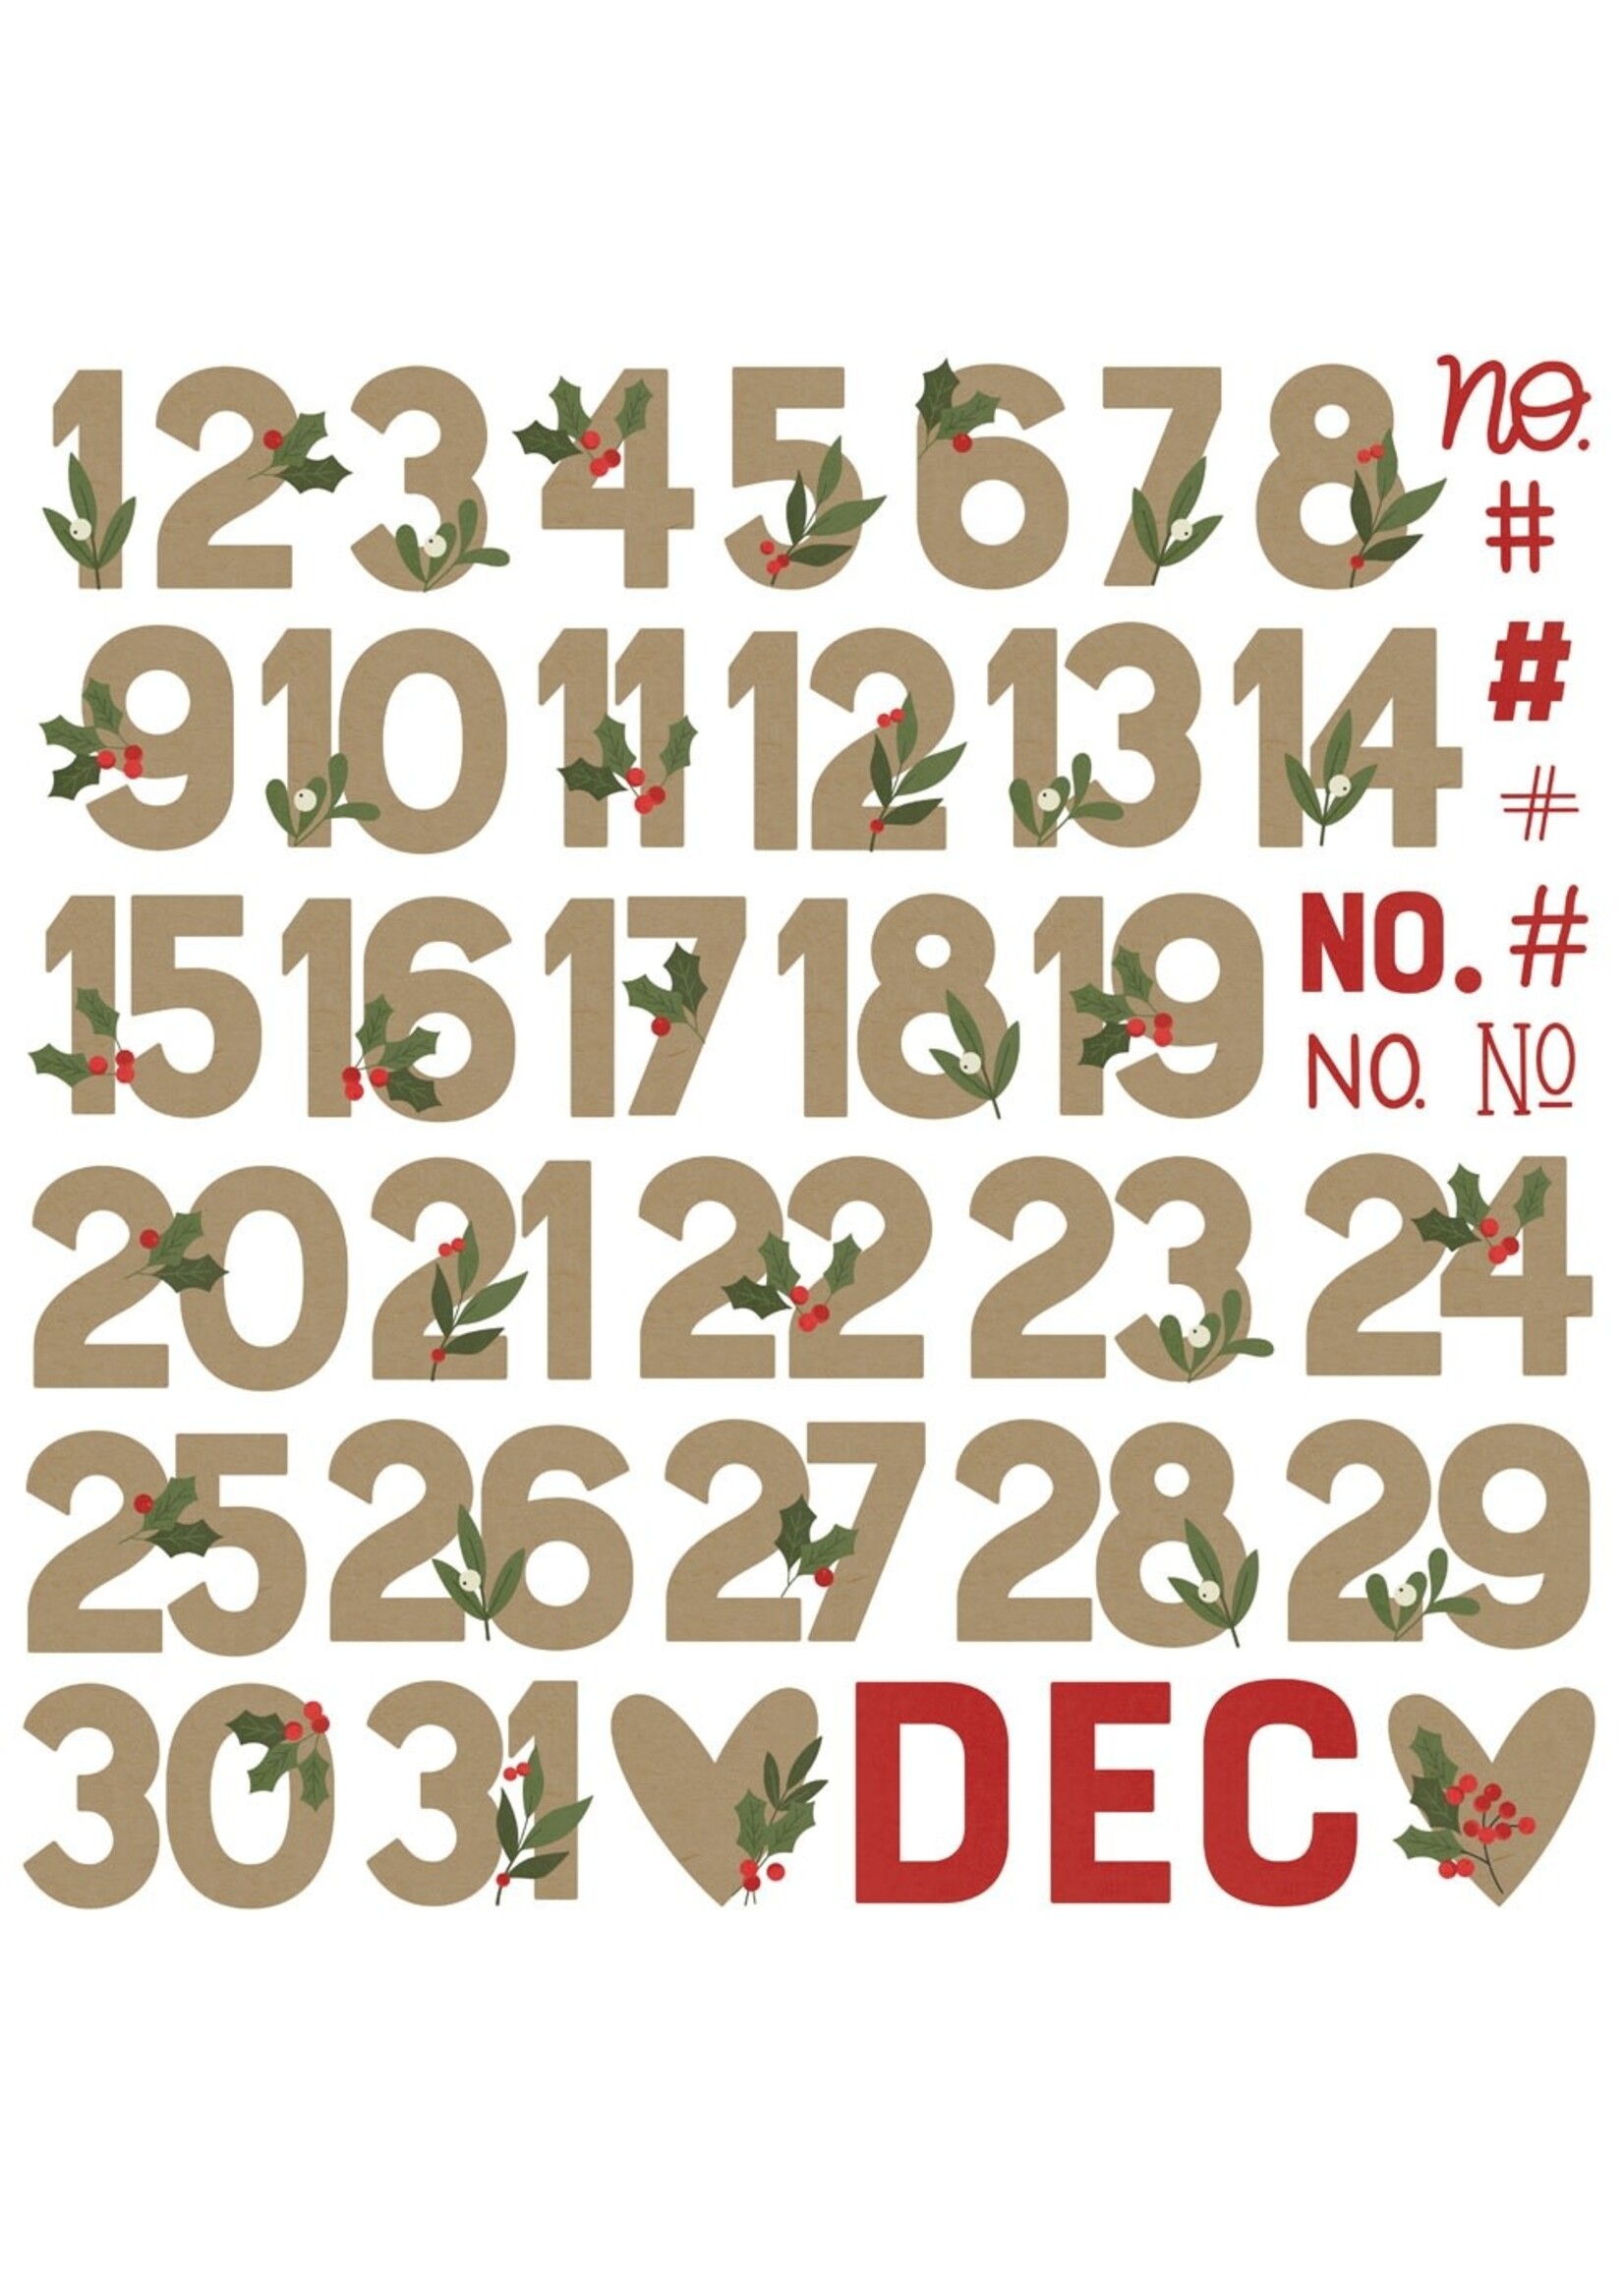 Simple Stories The Holiday Life Chipboard Numbers